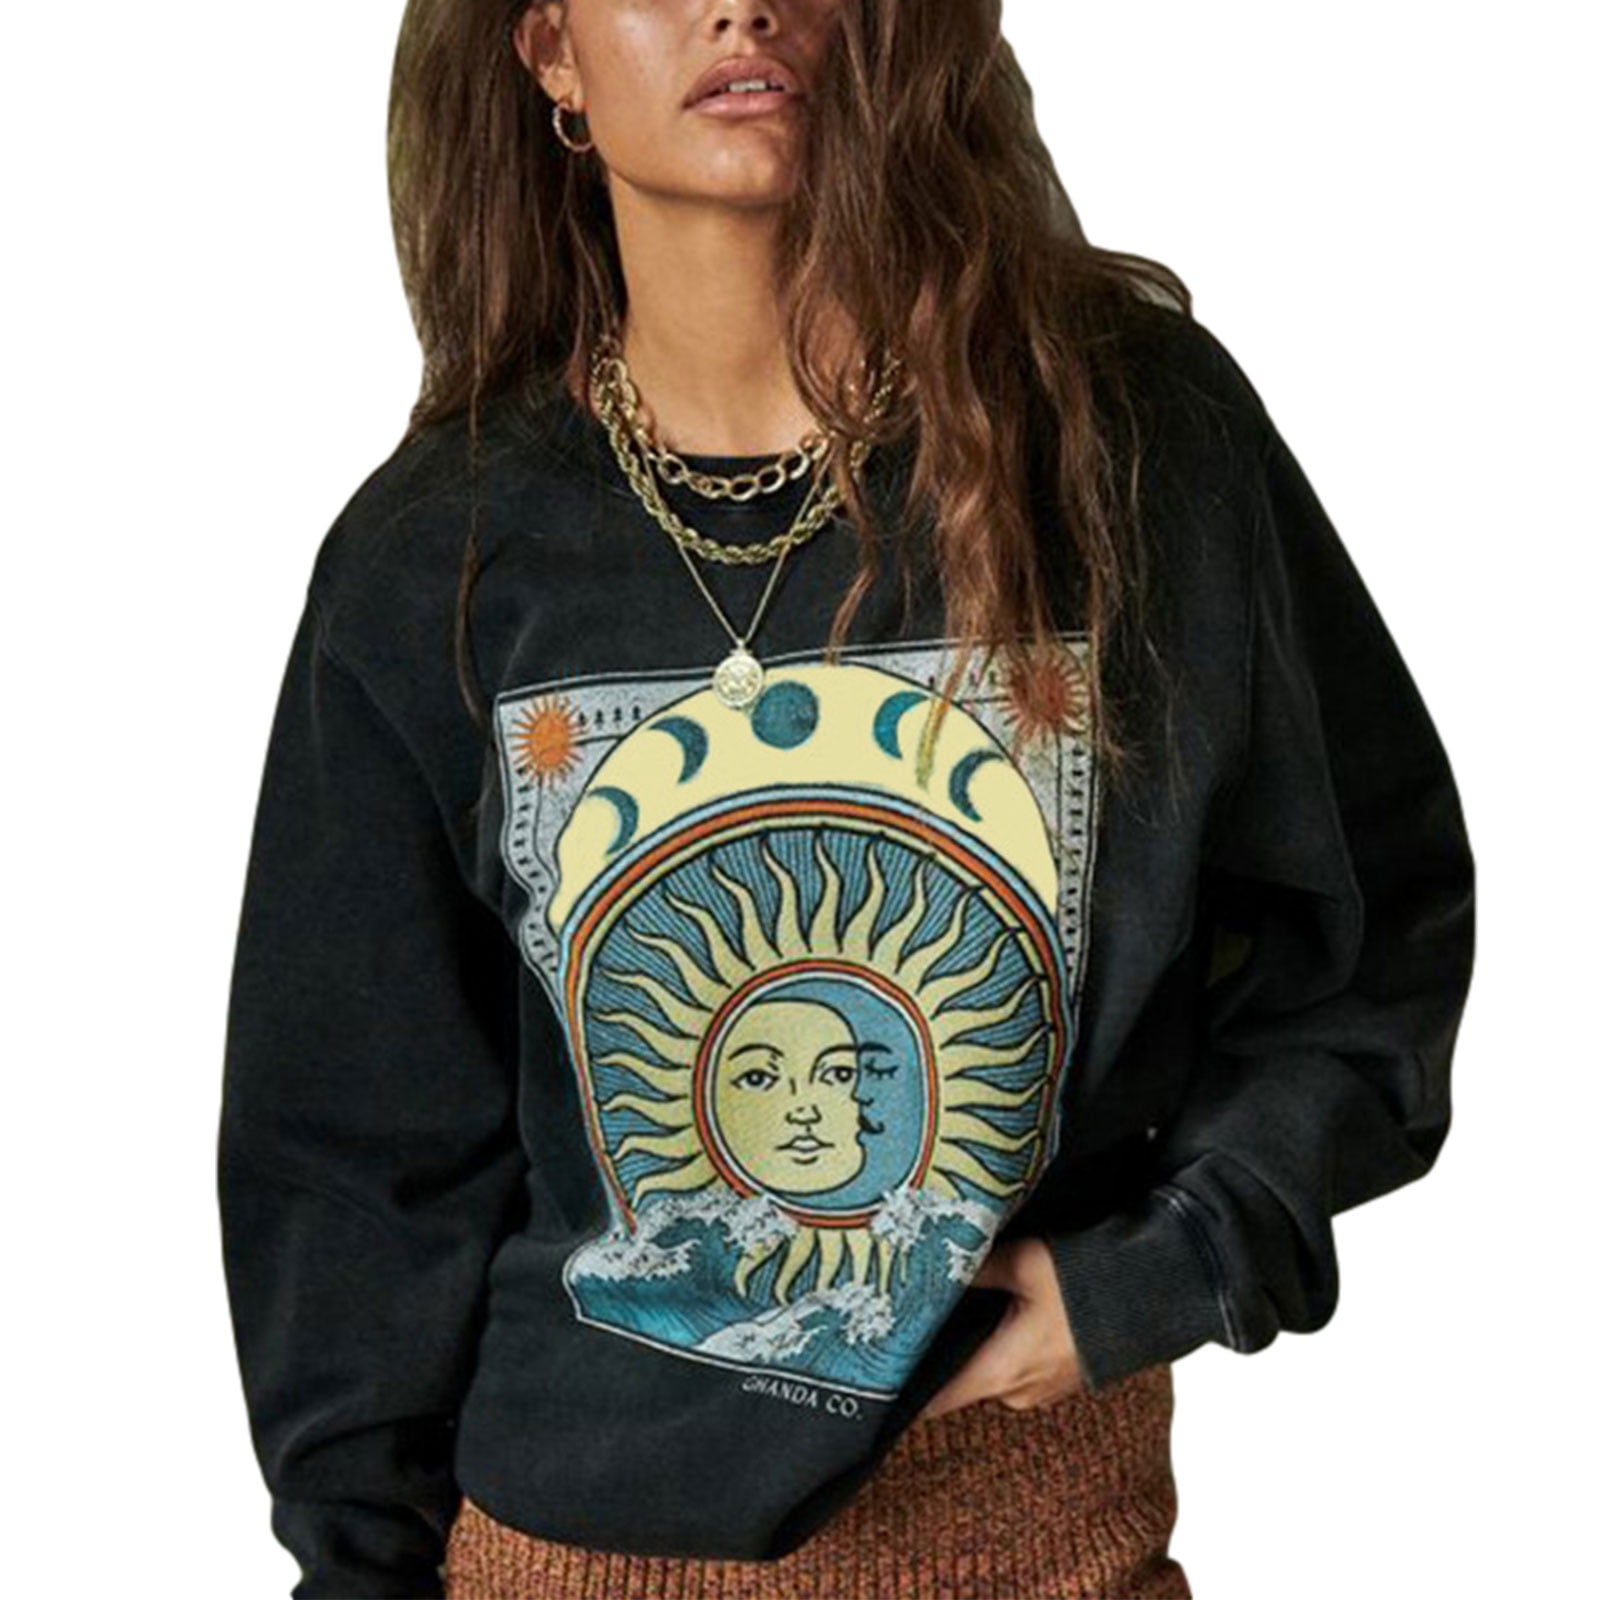 Halloween Graphic Sweatshirts for Women Casual Long Sleeve Tie-Dye Colorblock Pullover Shirts Teen Girls Tunic Pullover Tops 